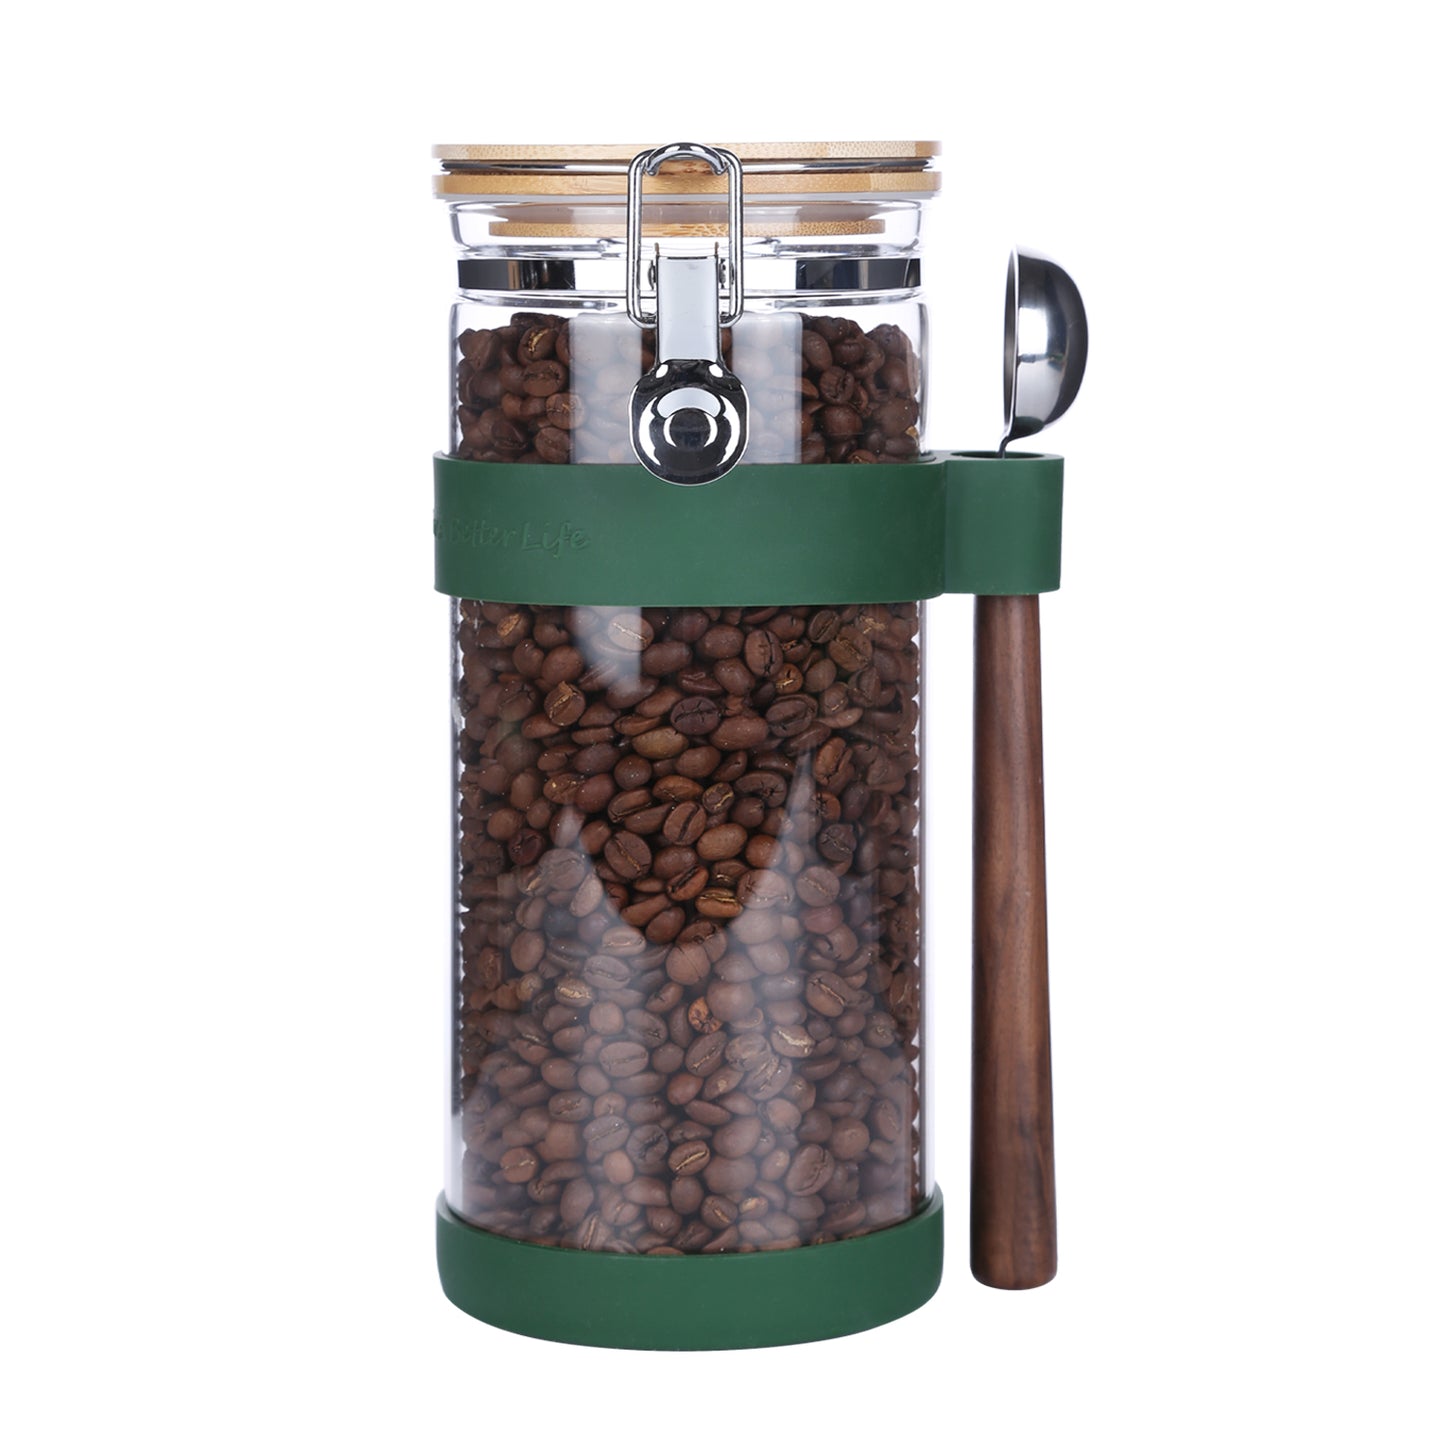 KKC  Glass Coffee Bean Storage Container with Scoop,Sealed Glass Storage Jar with Airtight Locking Lid,Airtight Nut Container,Sealed Container for Coffee Ground,Nut,Cereal,Pasta,50 fluid-oz